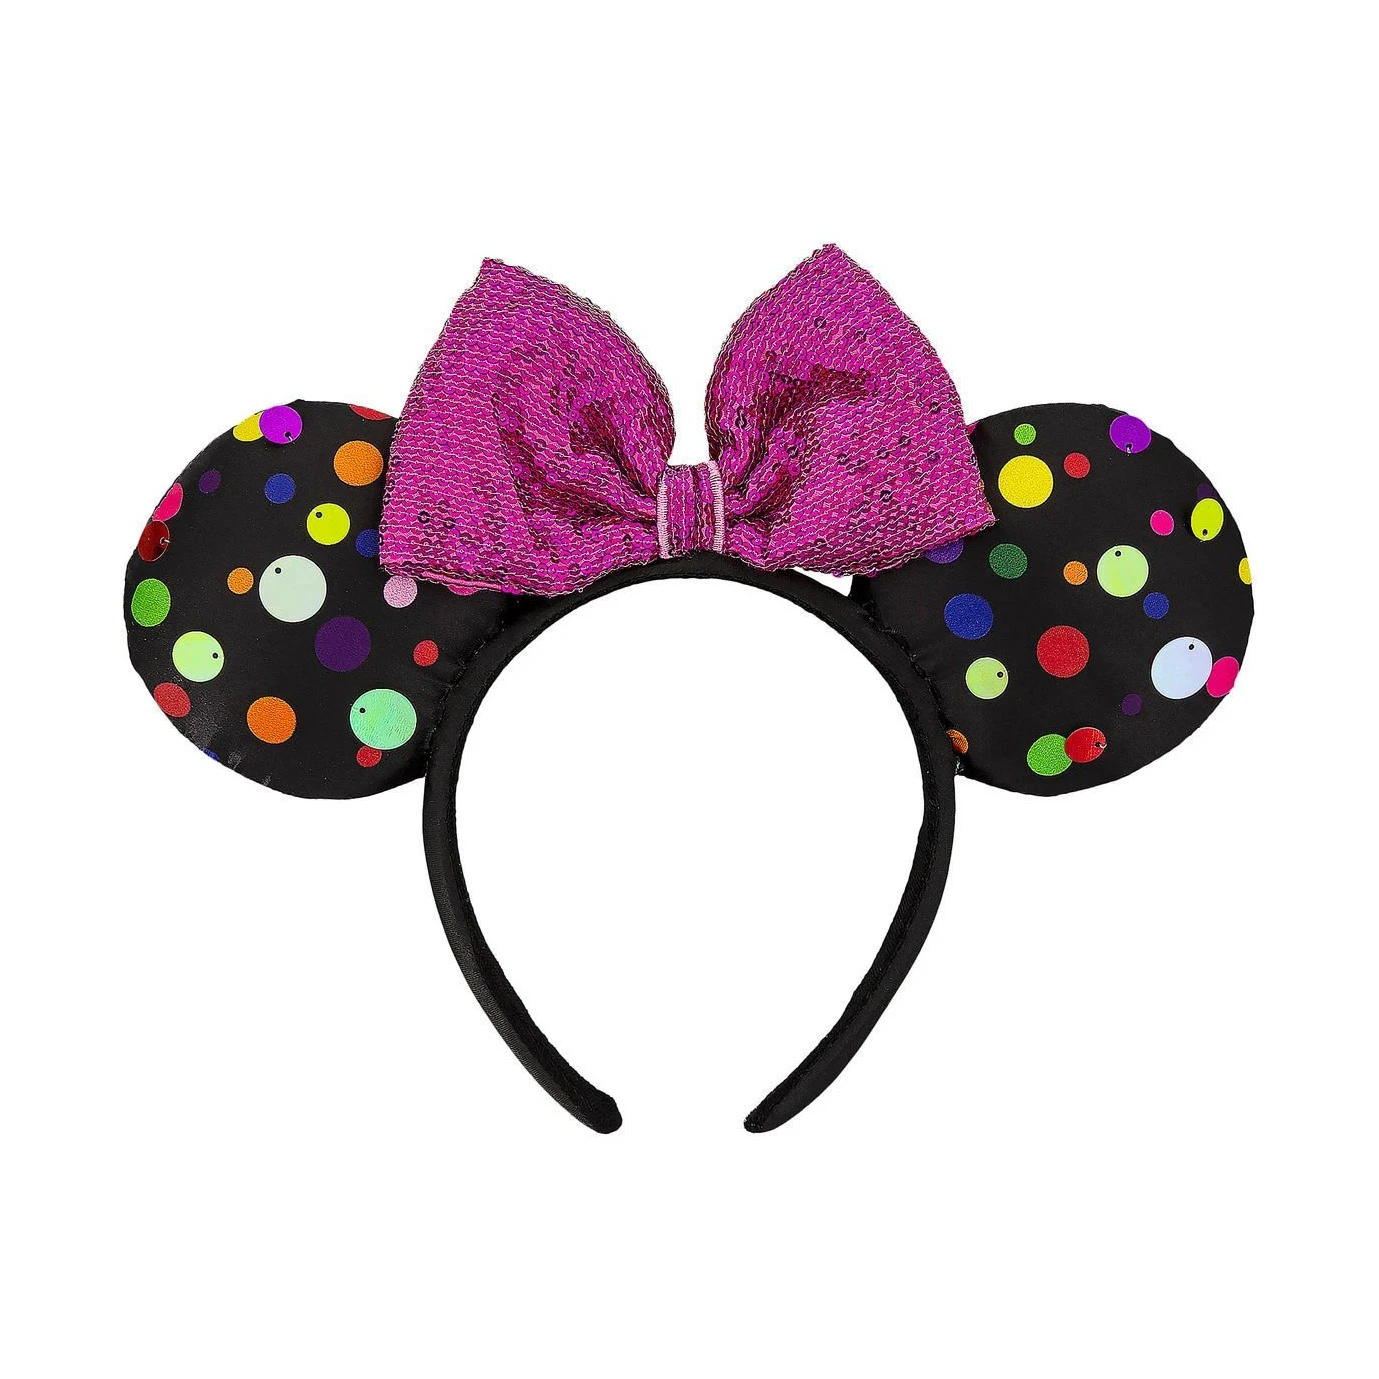 products Disney Parks - Minnie Mouse Ears Headband - Pink Sequin Bow - Rock the Dots - Inside Out